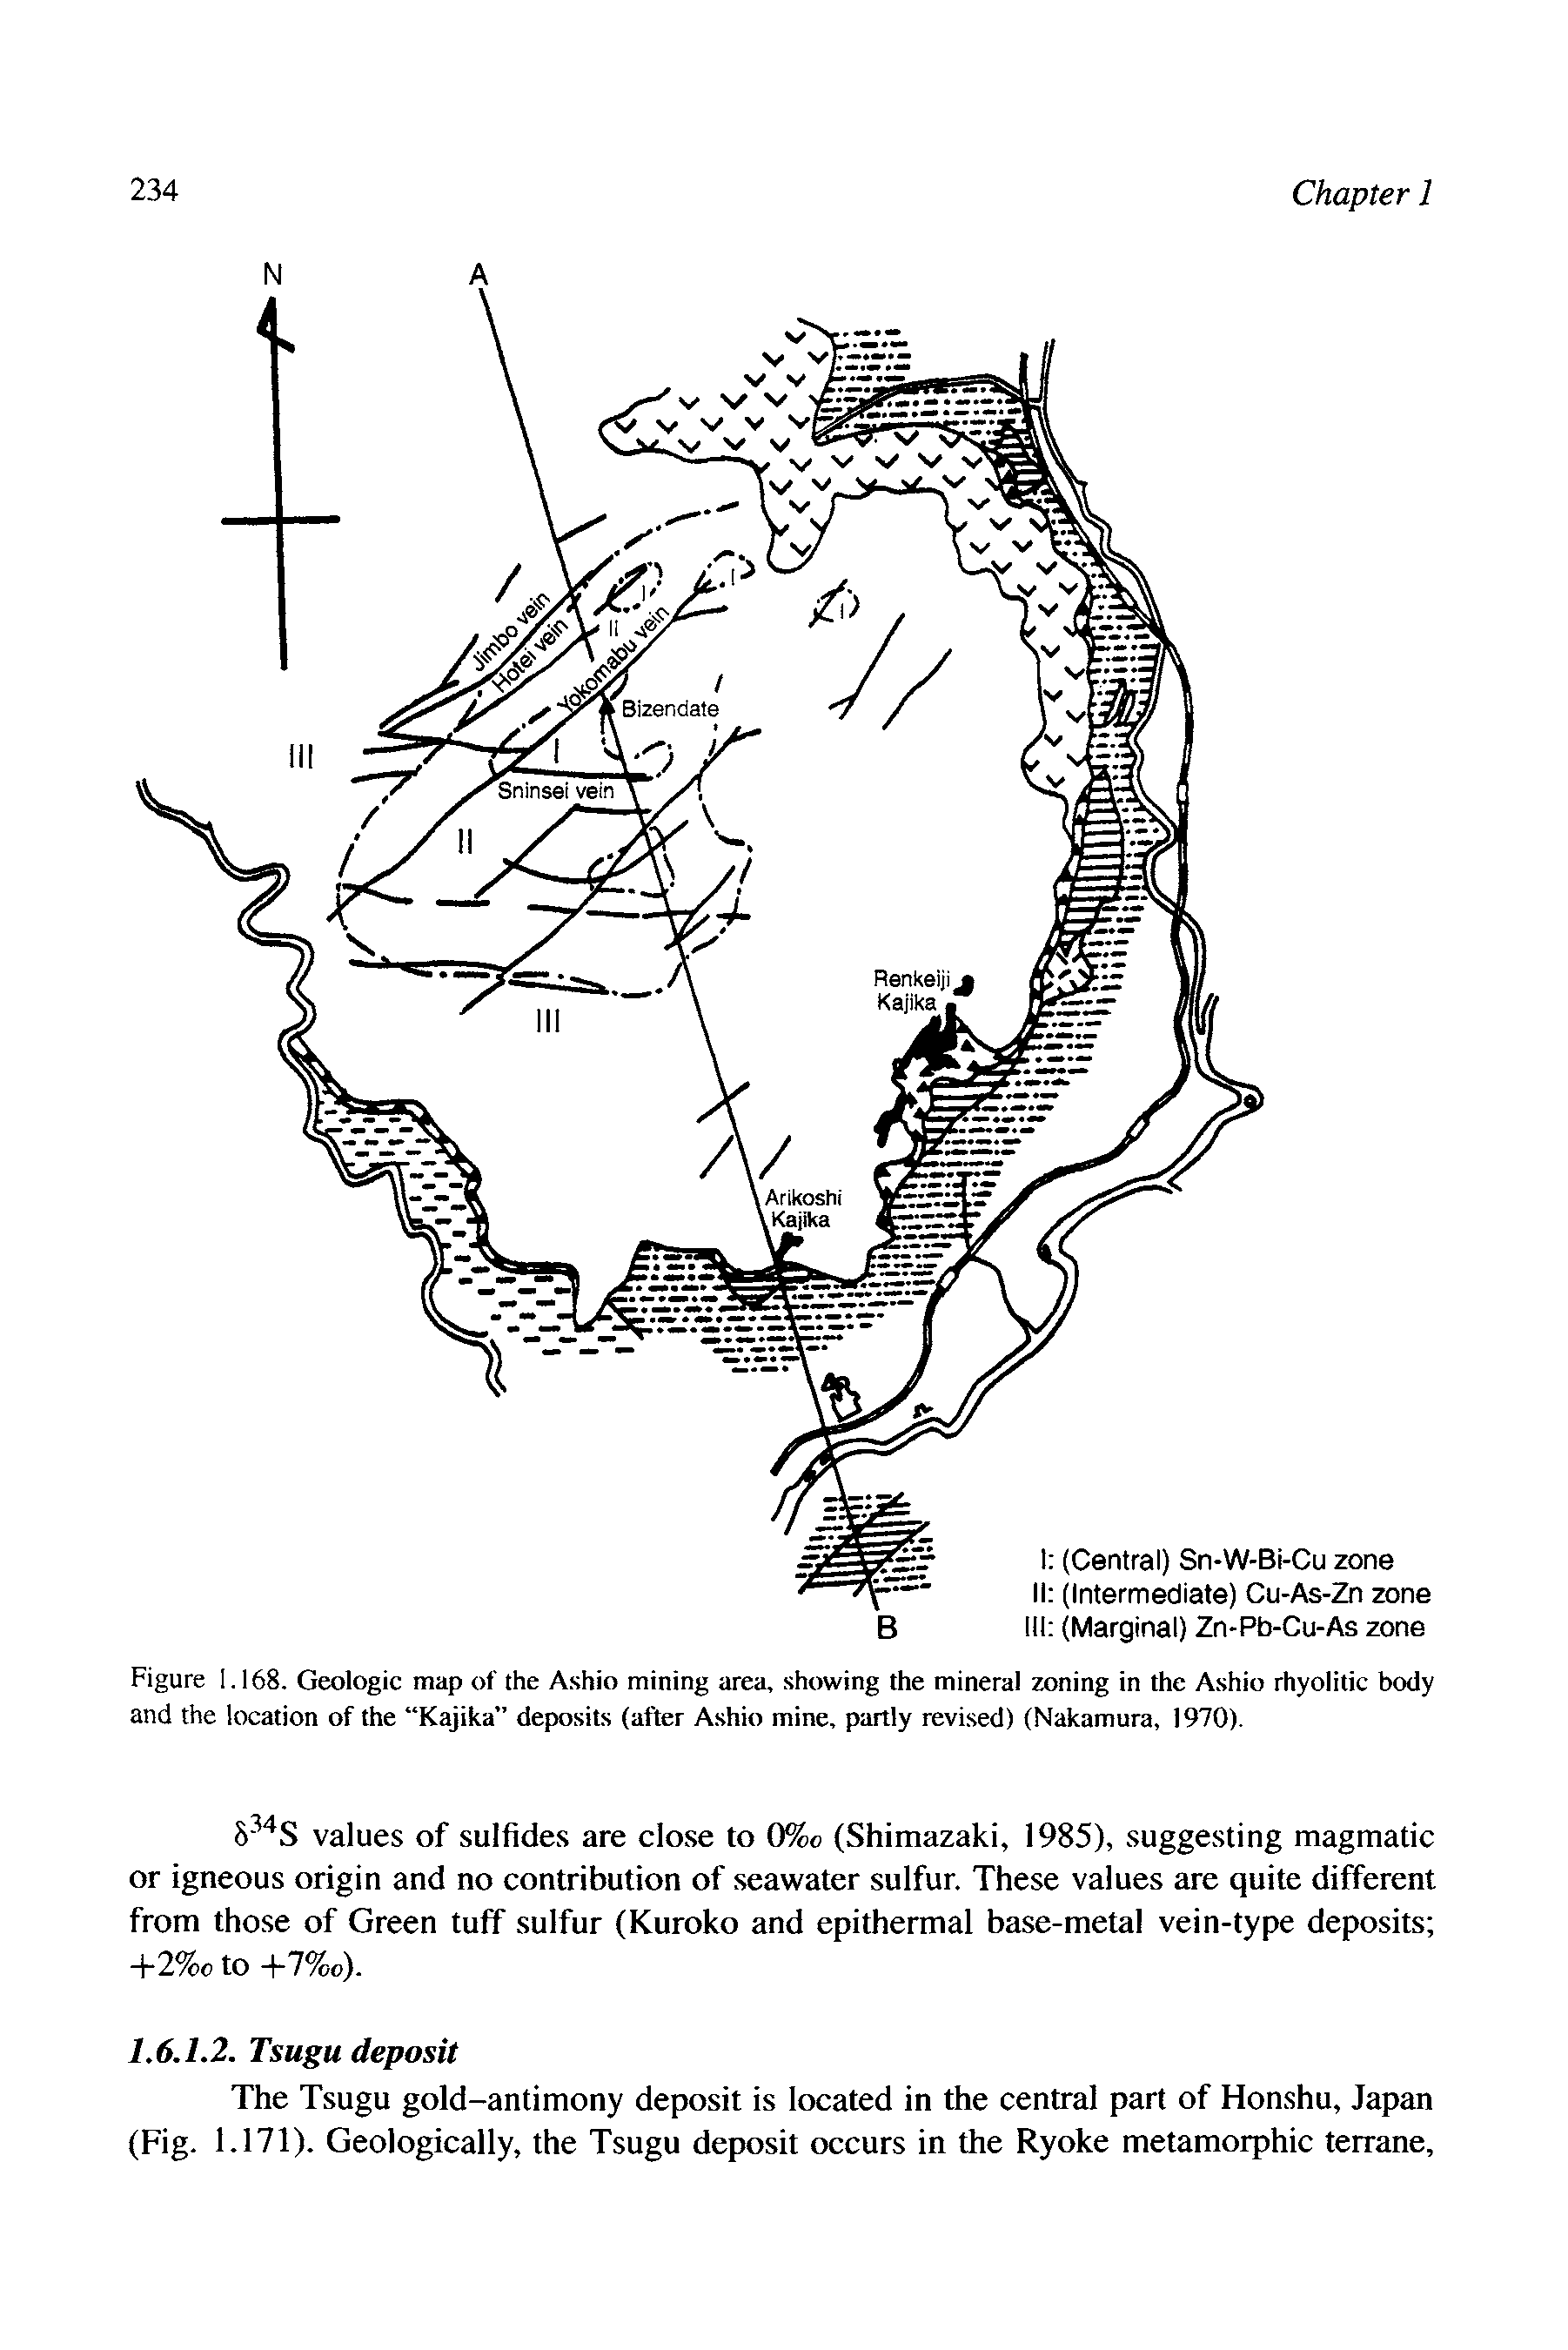 Figure 1.168. Geologic map of the Ashio mining area, showing the mineral zoning in the Ashio rhyolitic body and the location of the Kajika deposits (after Ashio mine, partly revised) (Nakamura, 1970).